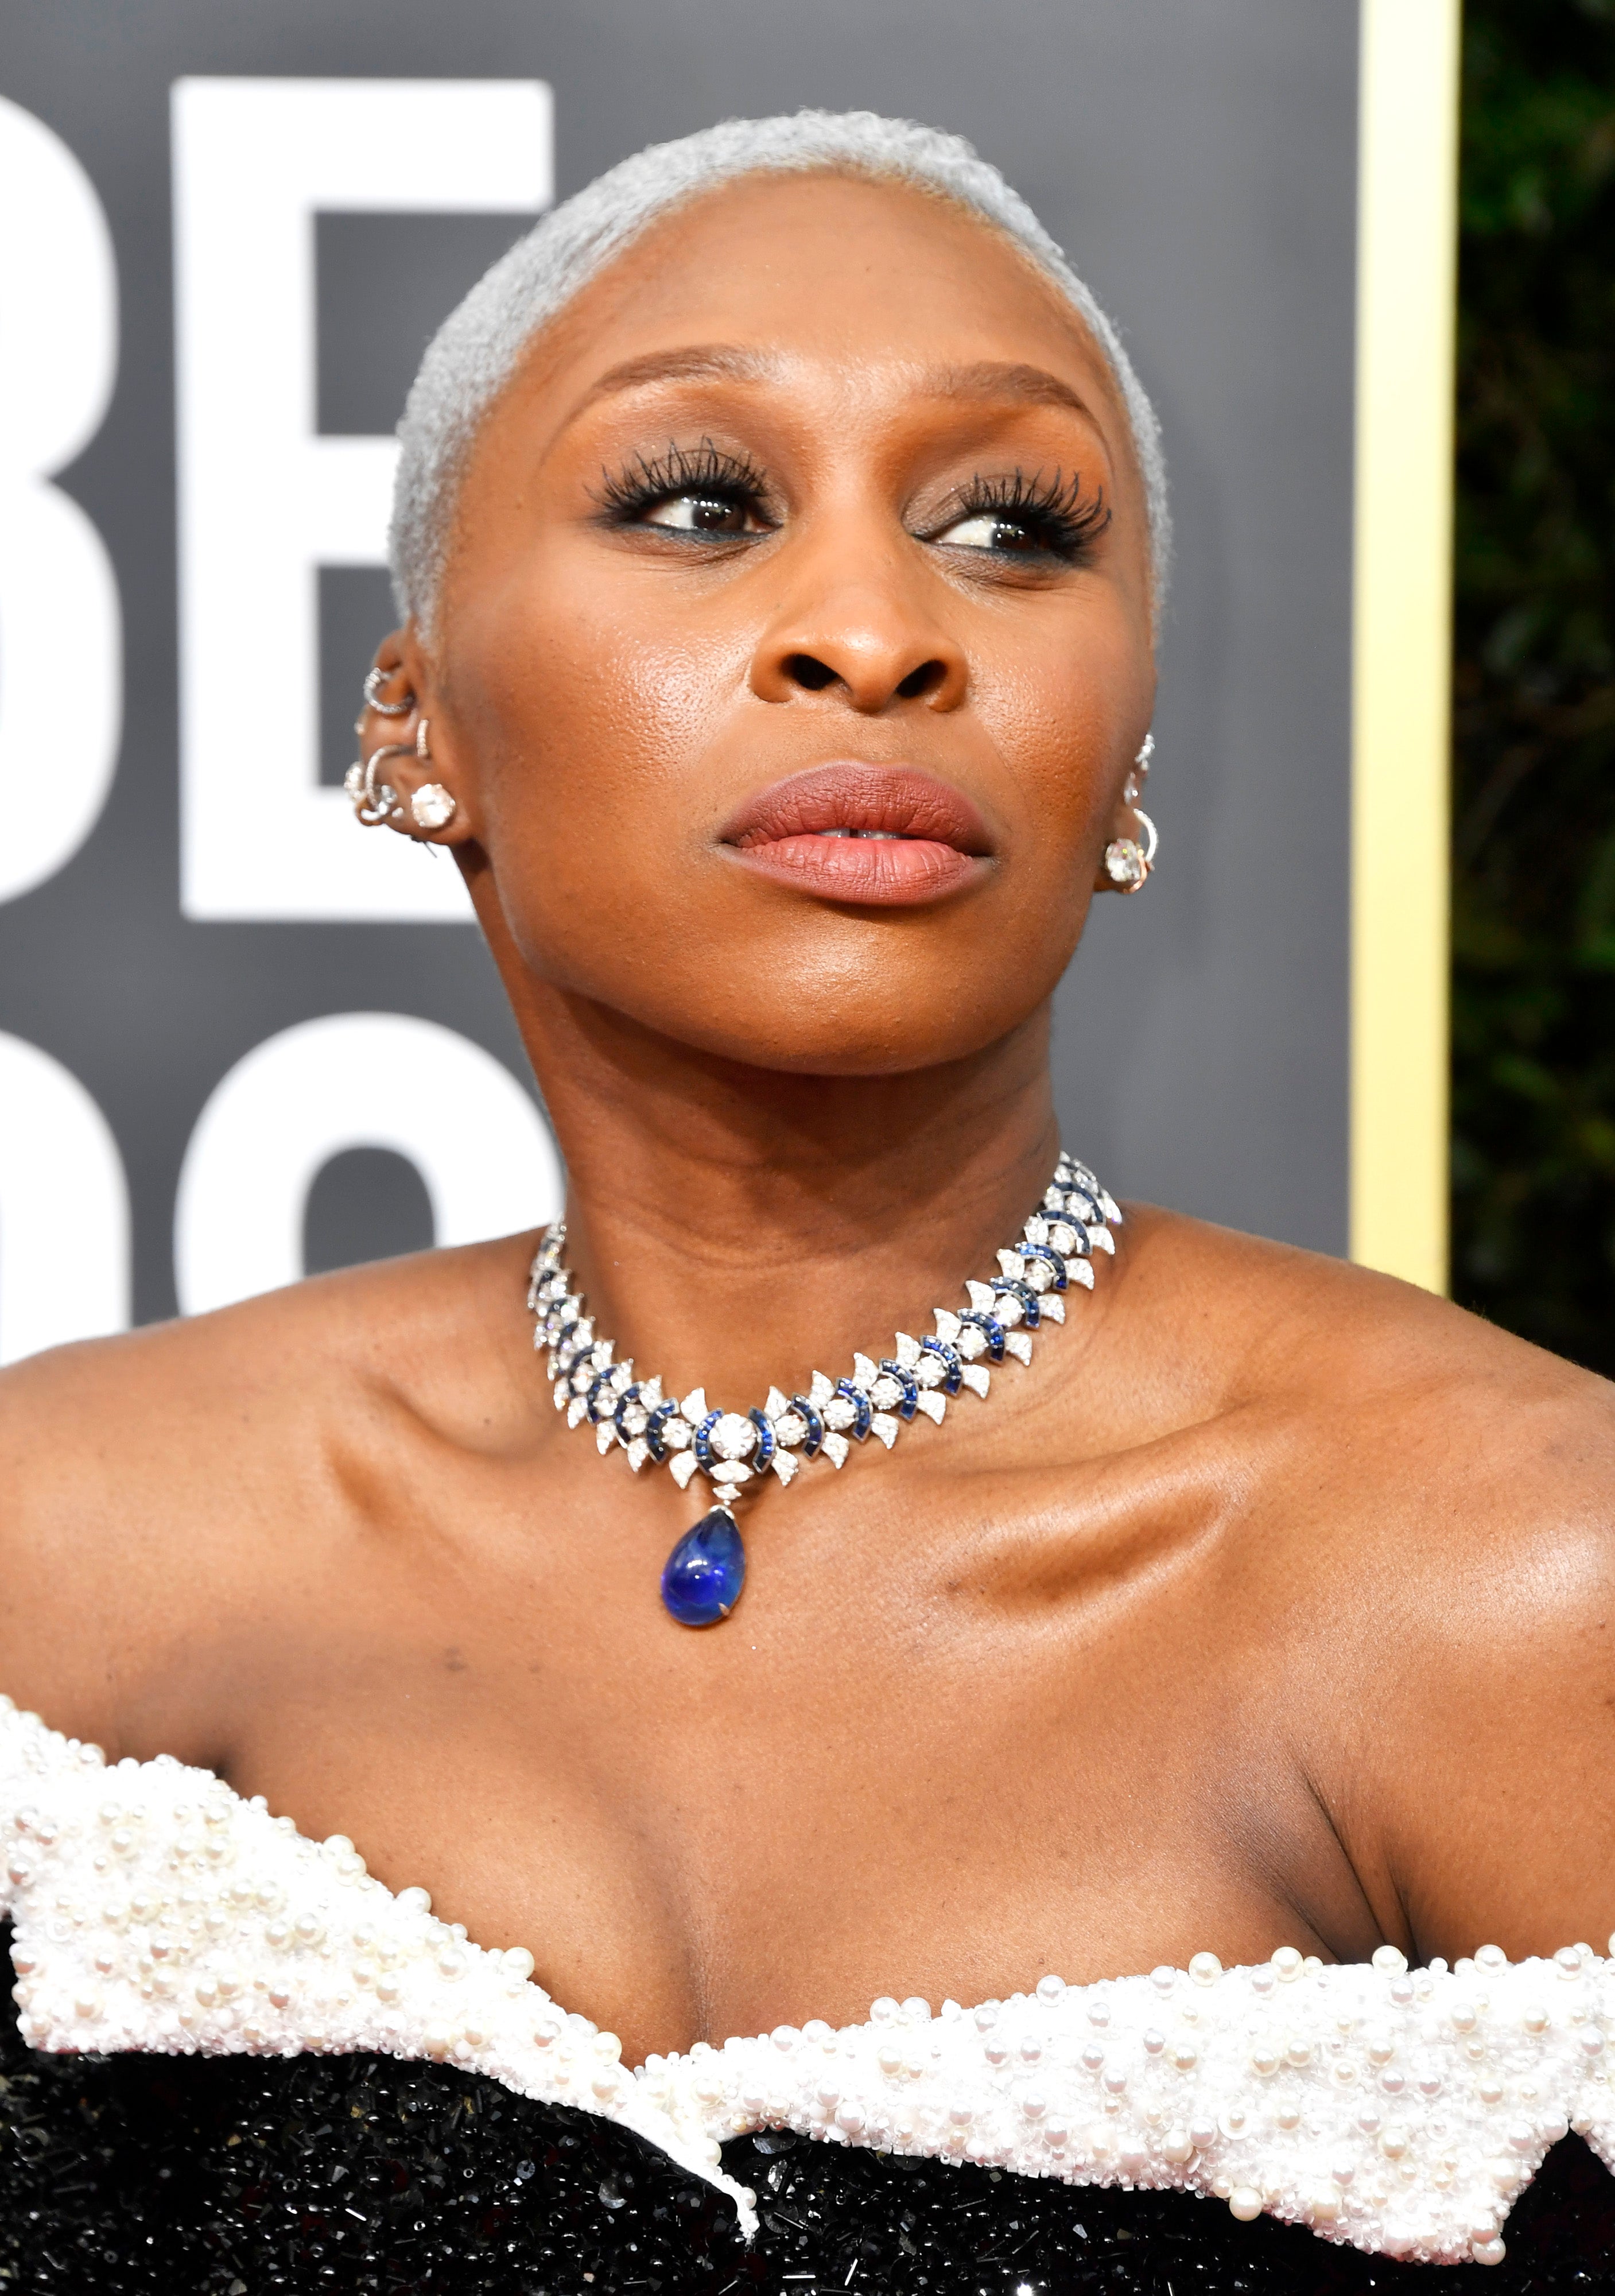 The Only Black Acting Nominee Cynthia Erivo Will Also Perform At The Oscars